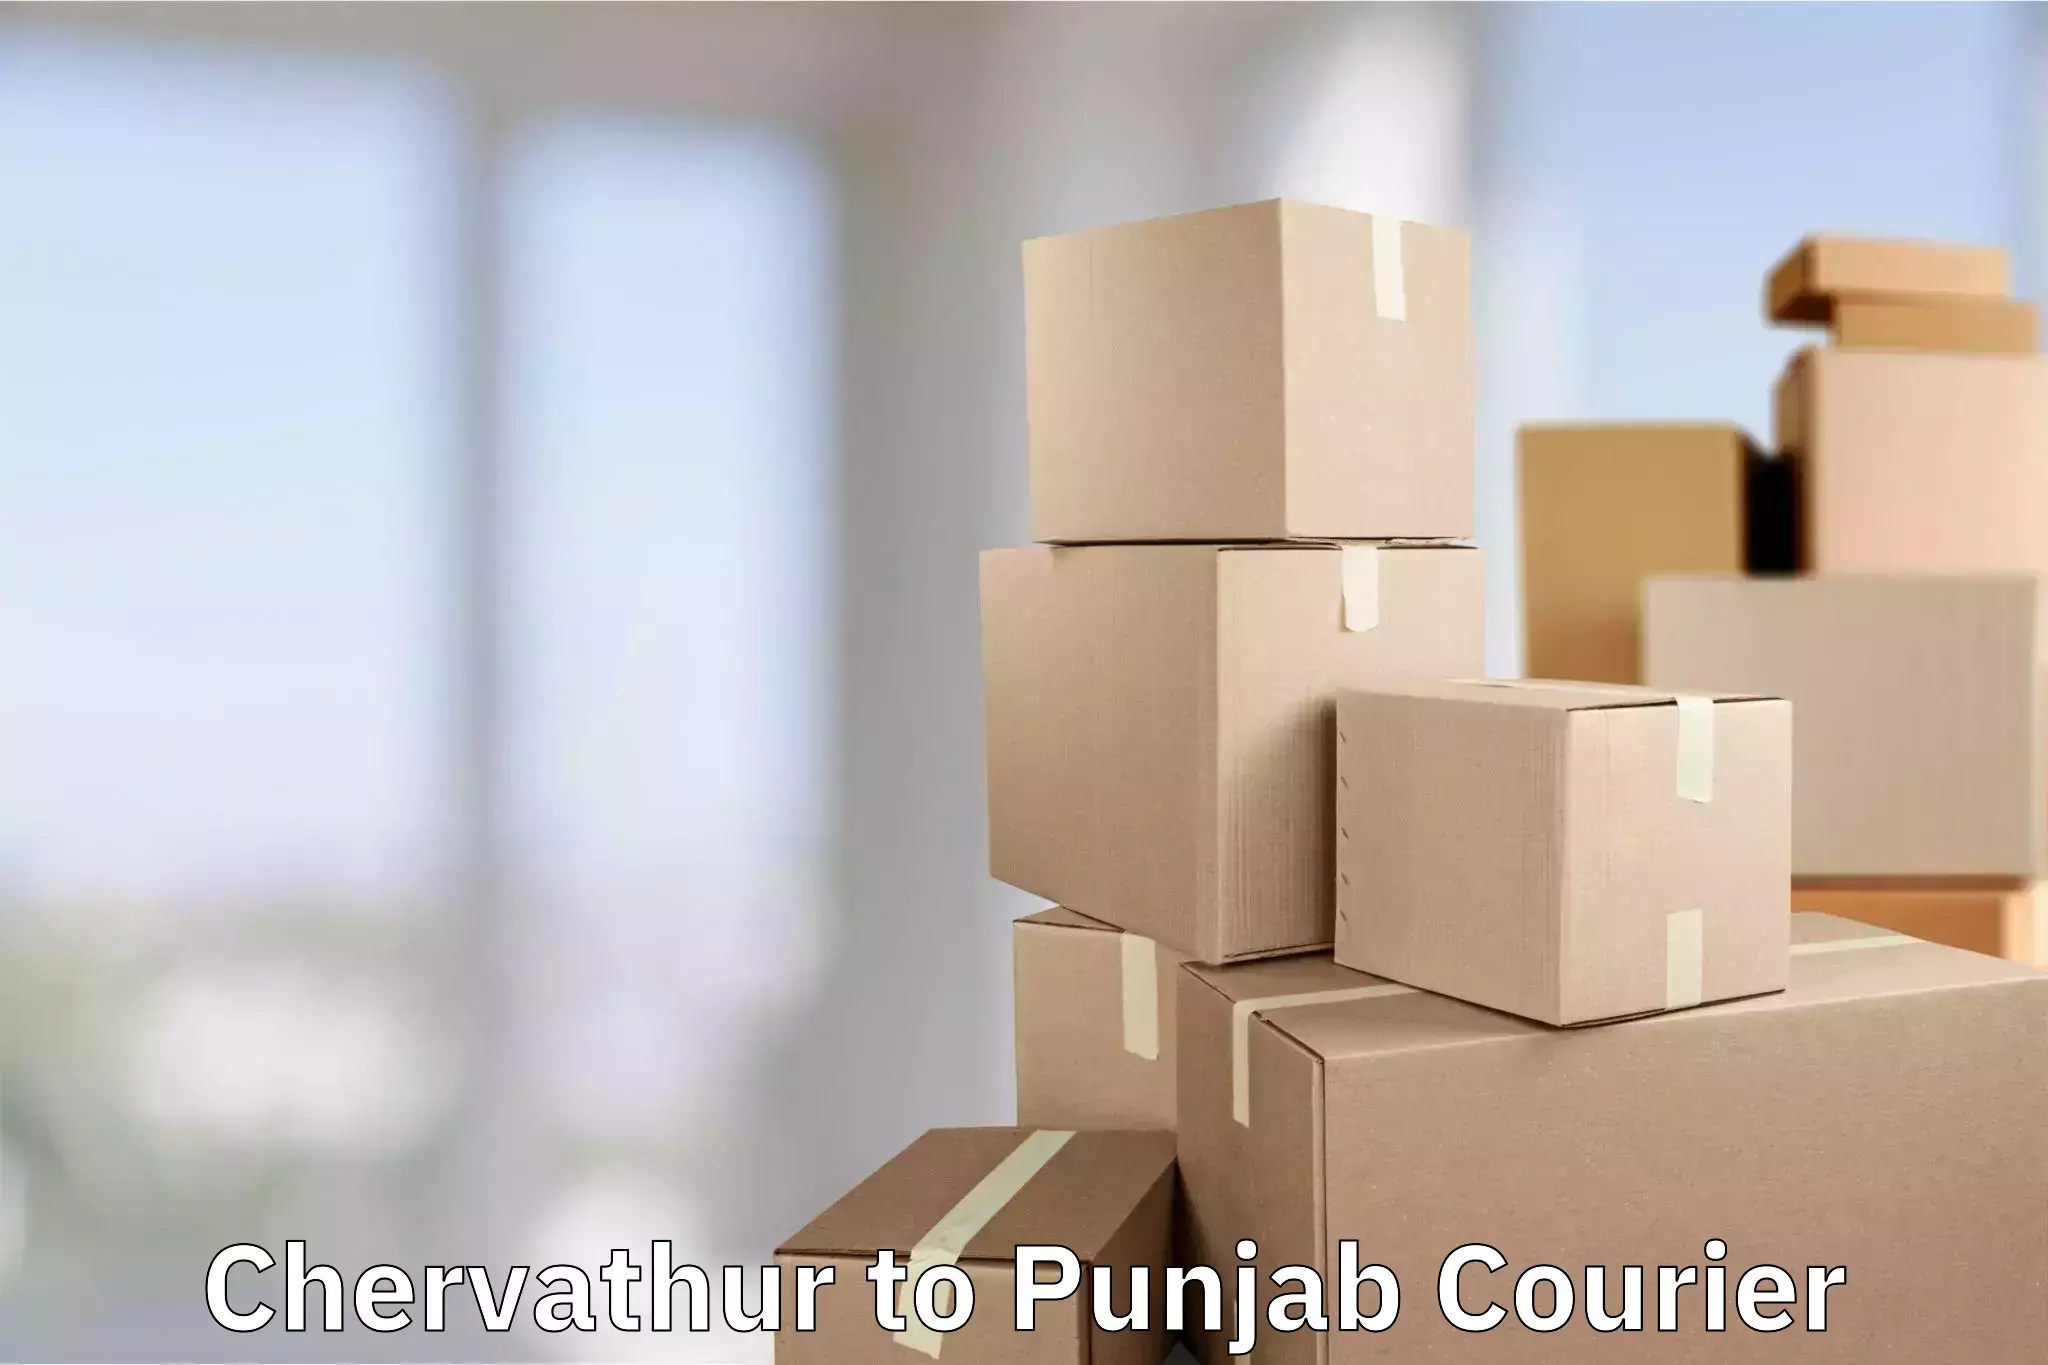 Luggage transport solutions Chervathur to Punjab